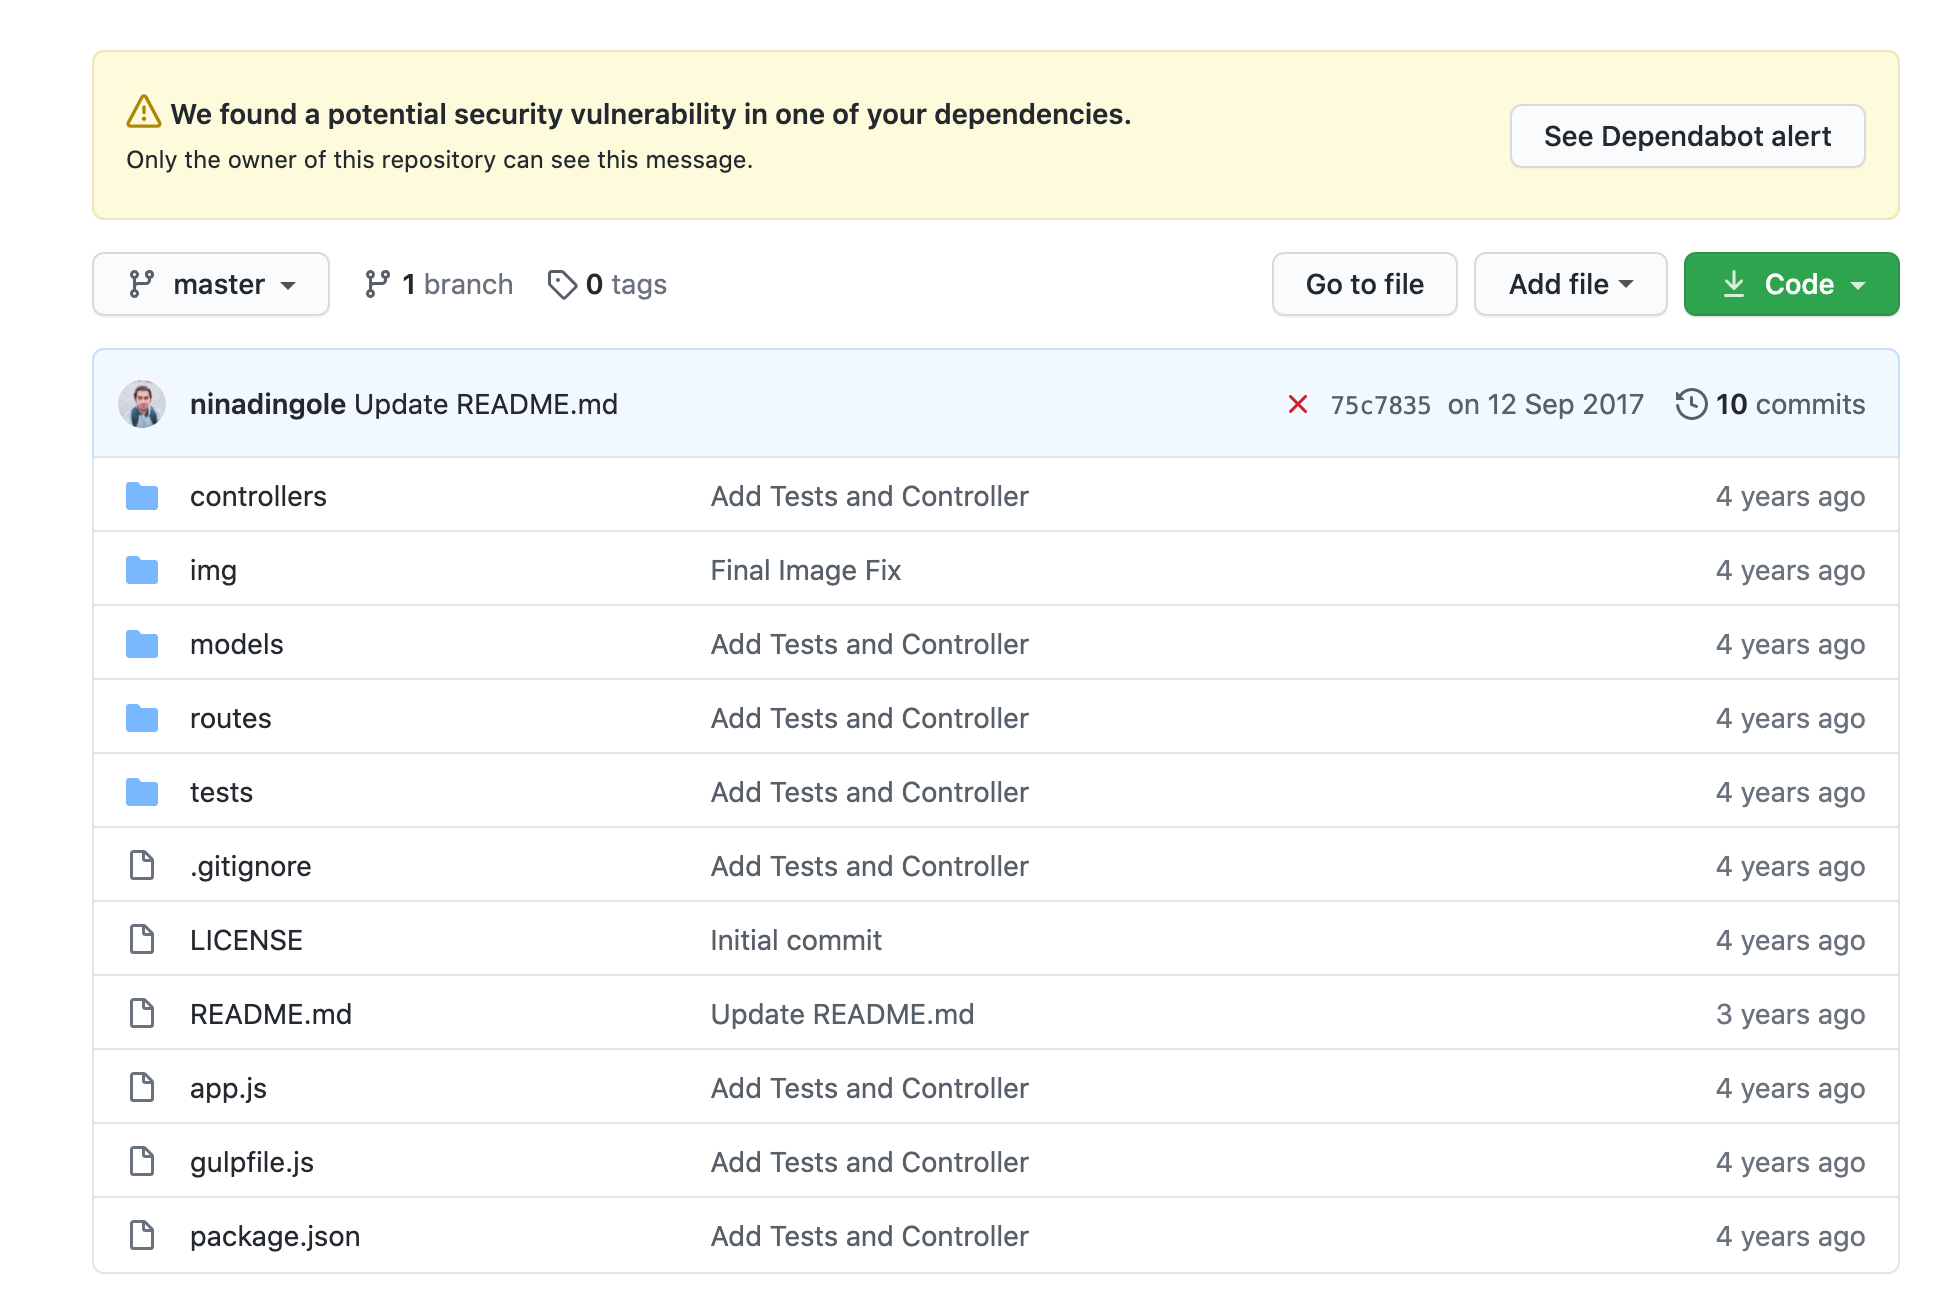 Dependabot alerts for a vulnerable dependency in the repository